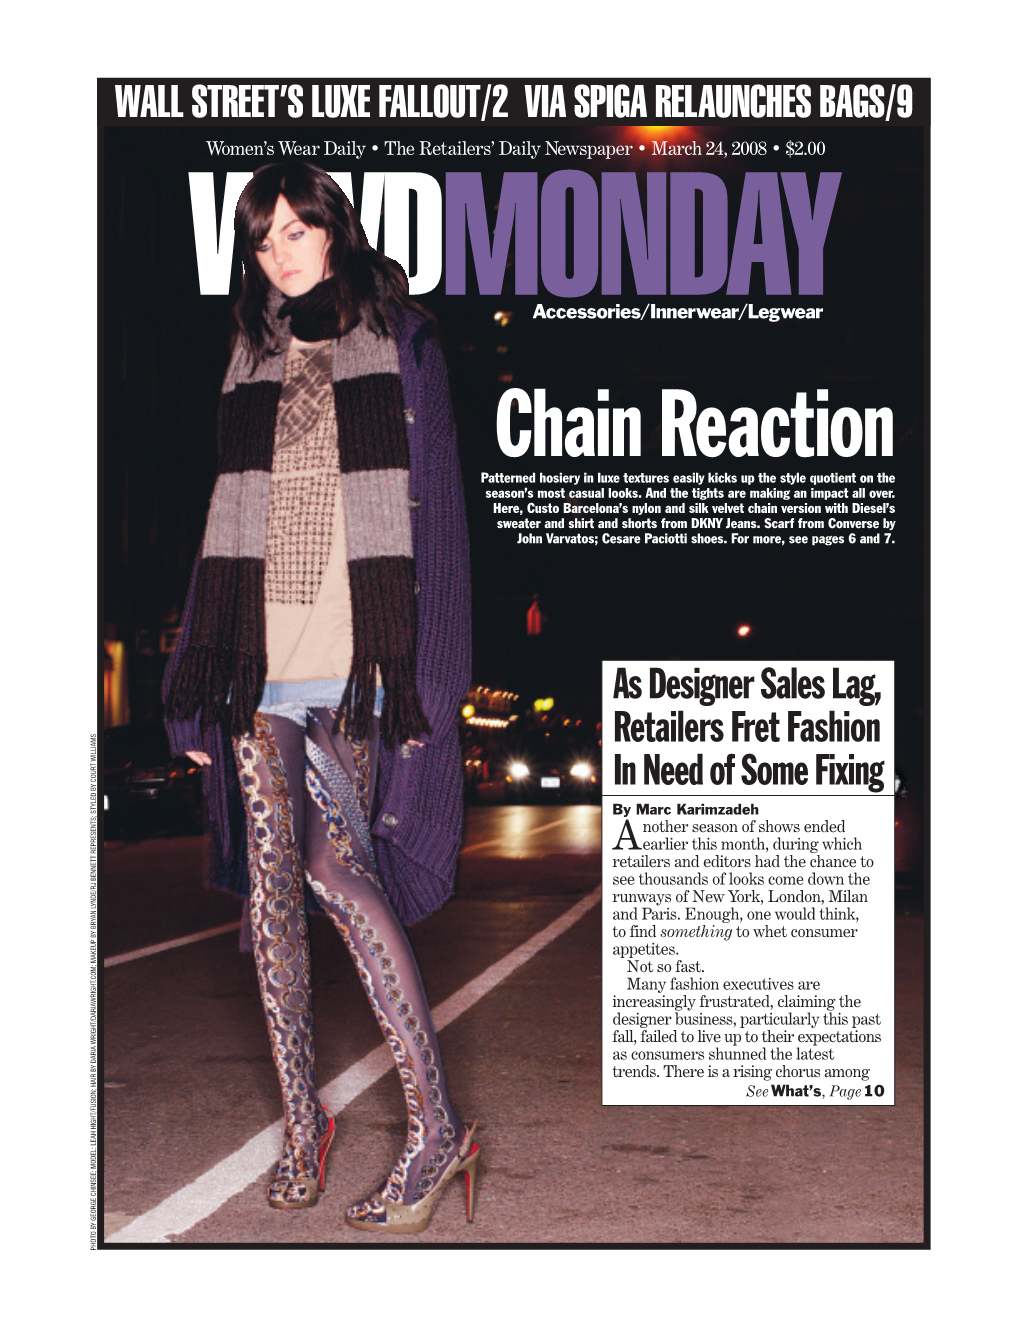 Chain Reaction Patterned Hosiery in Luxe Textures Easily Kicks up the Style Quotient on the Season’S Most Casual Looks